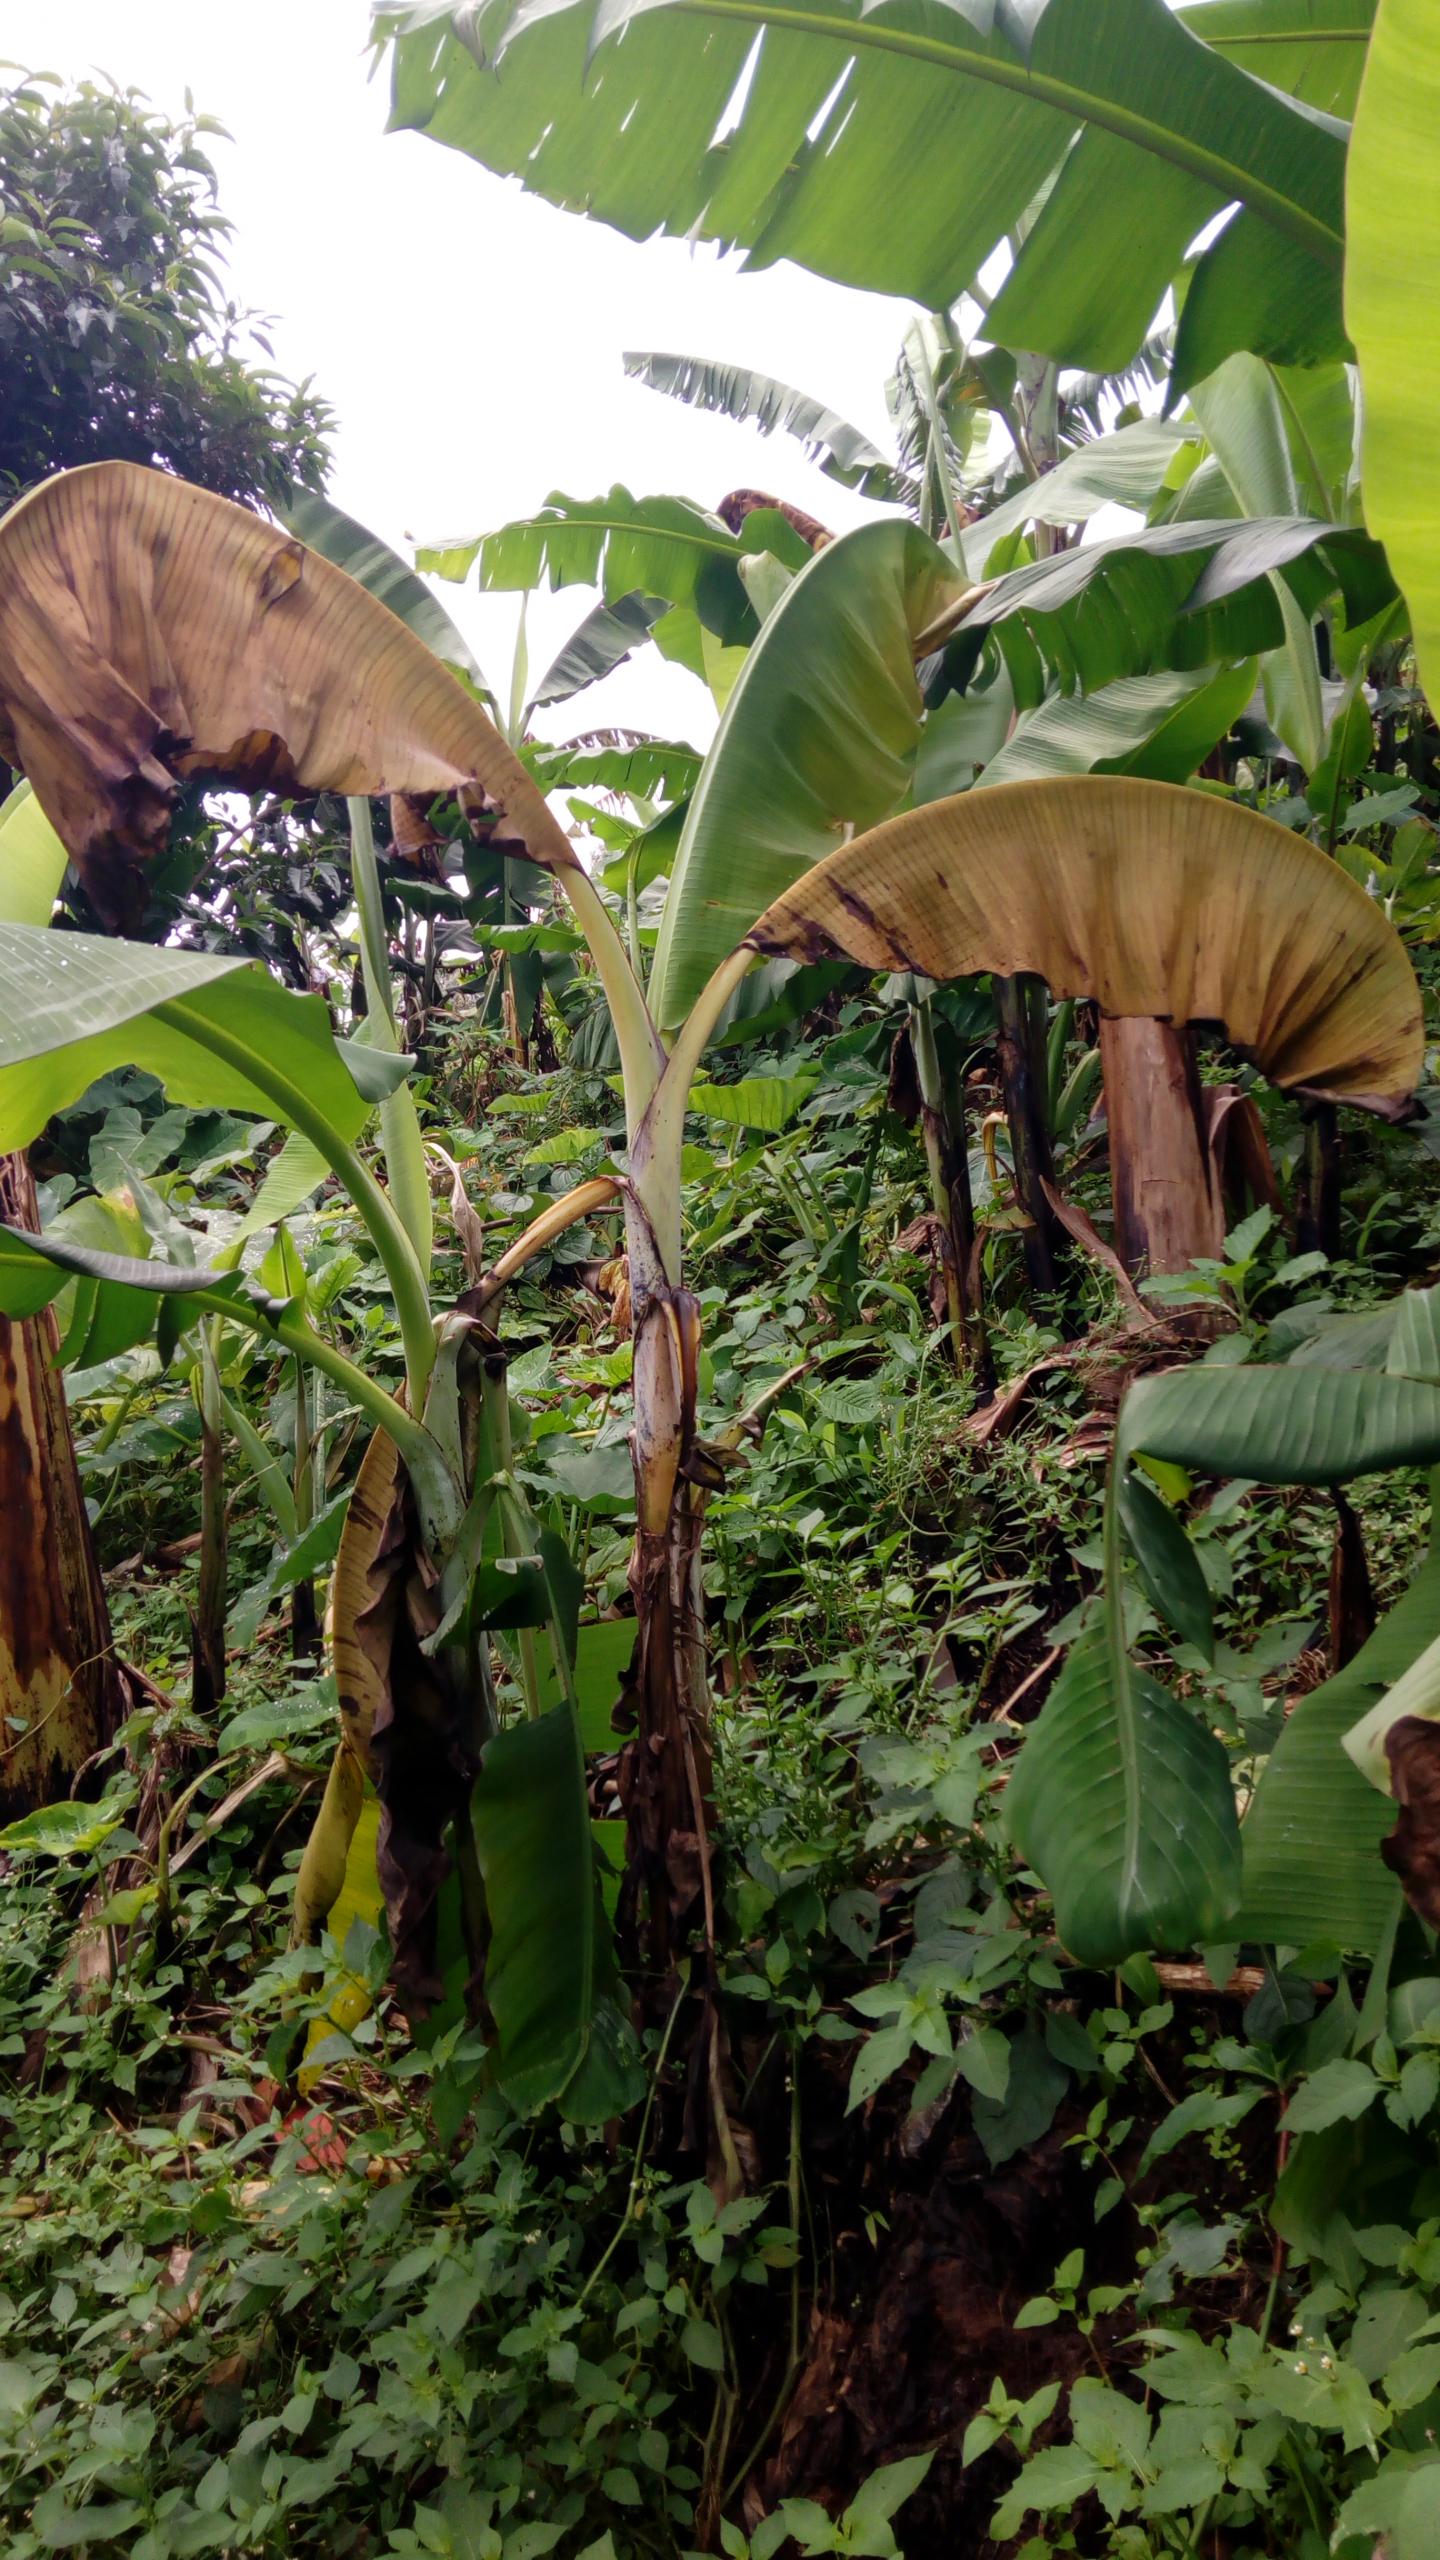 A ground-level view of a banana plant affected by Xanthomonas Wilt or (BXW). Source: Michael Selvaraj/International Center for Tropical Agriculture